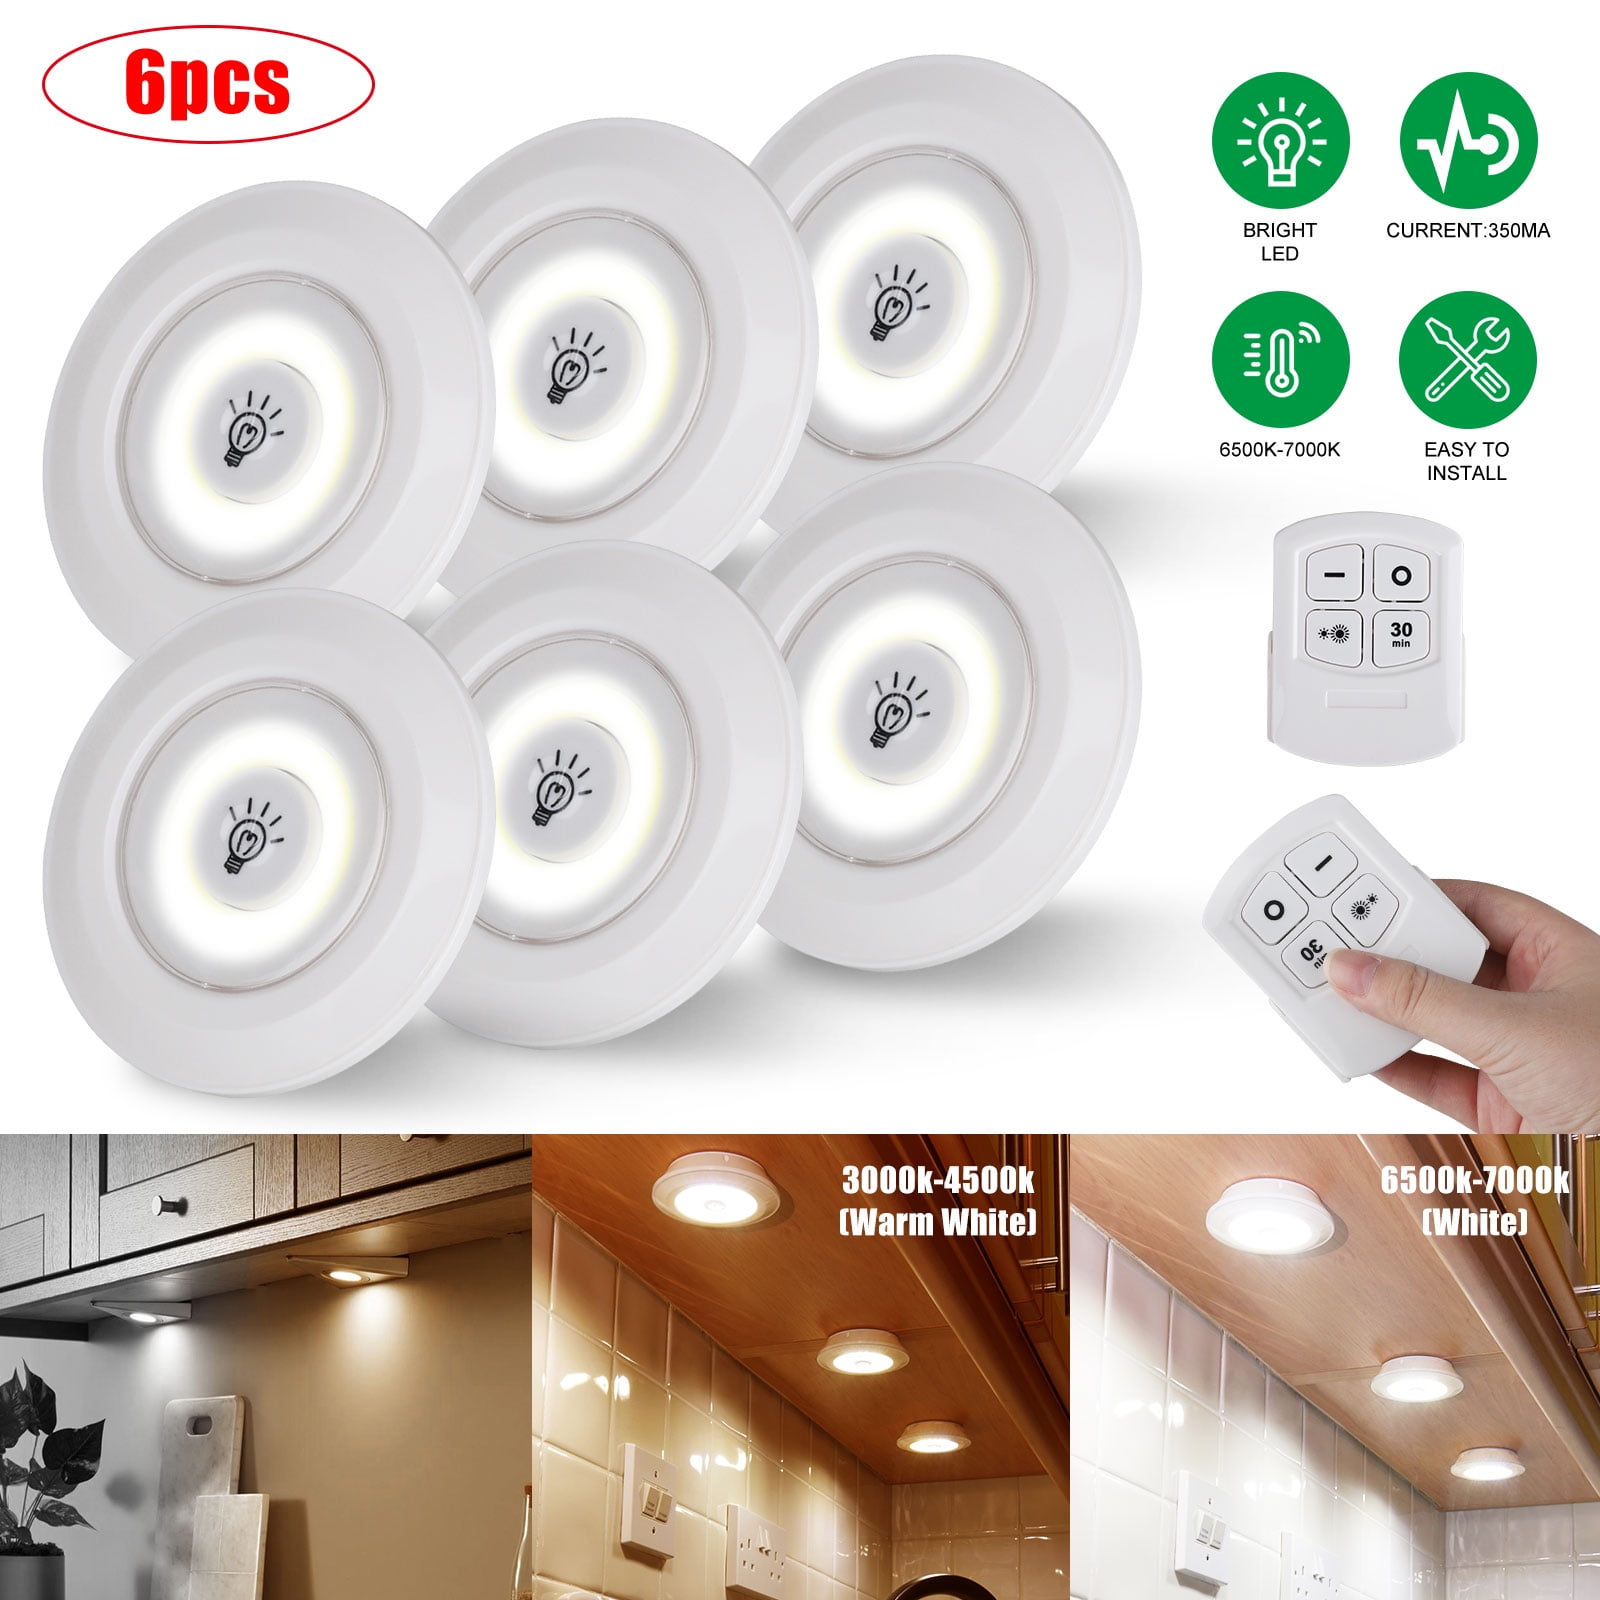 LED Kitchen Under Cabinet Lighting Wireless Counter Night Light Battery Operated 